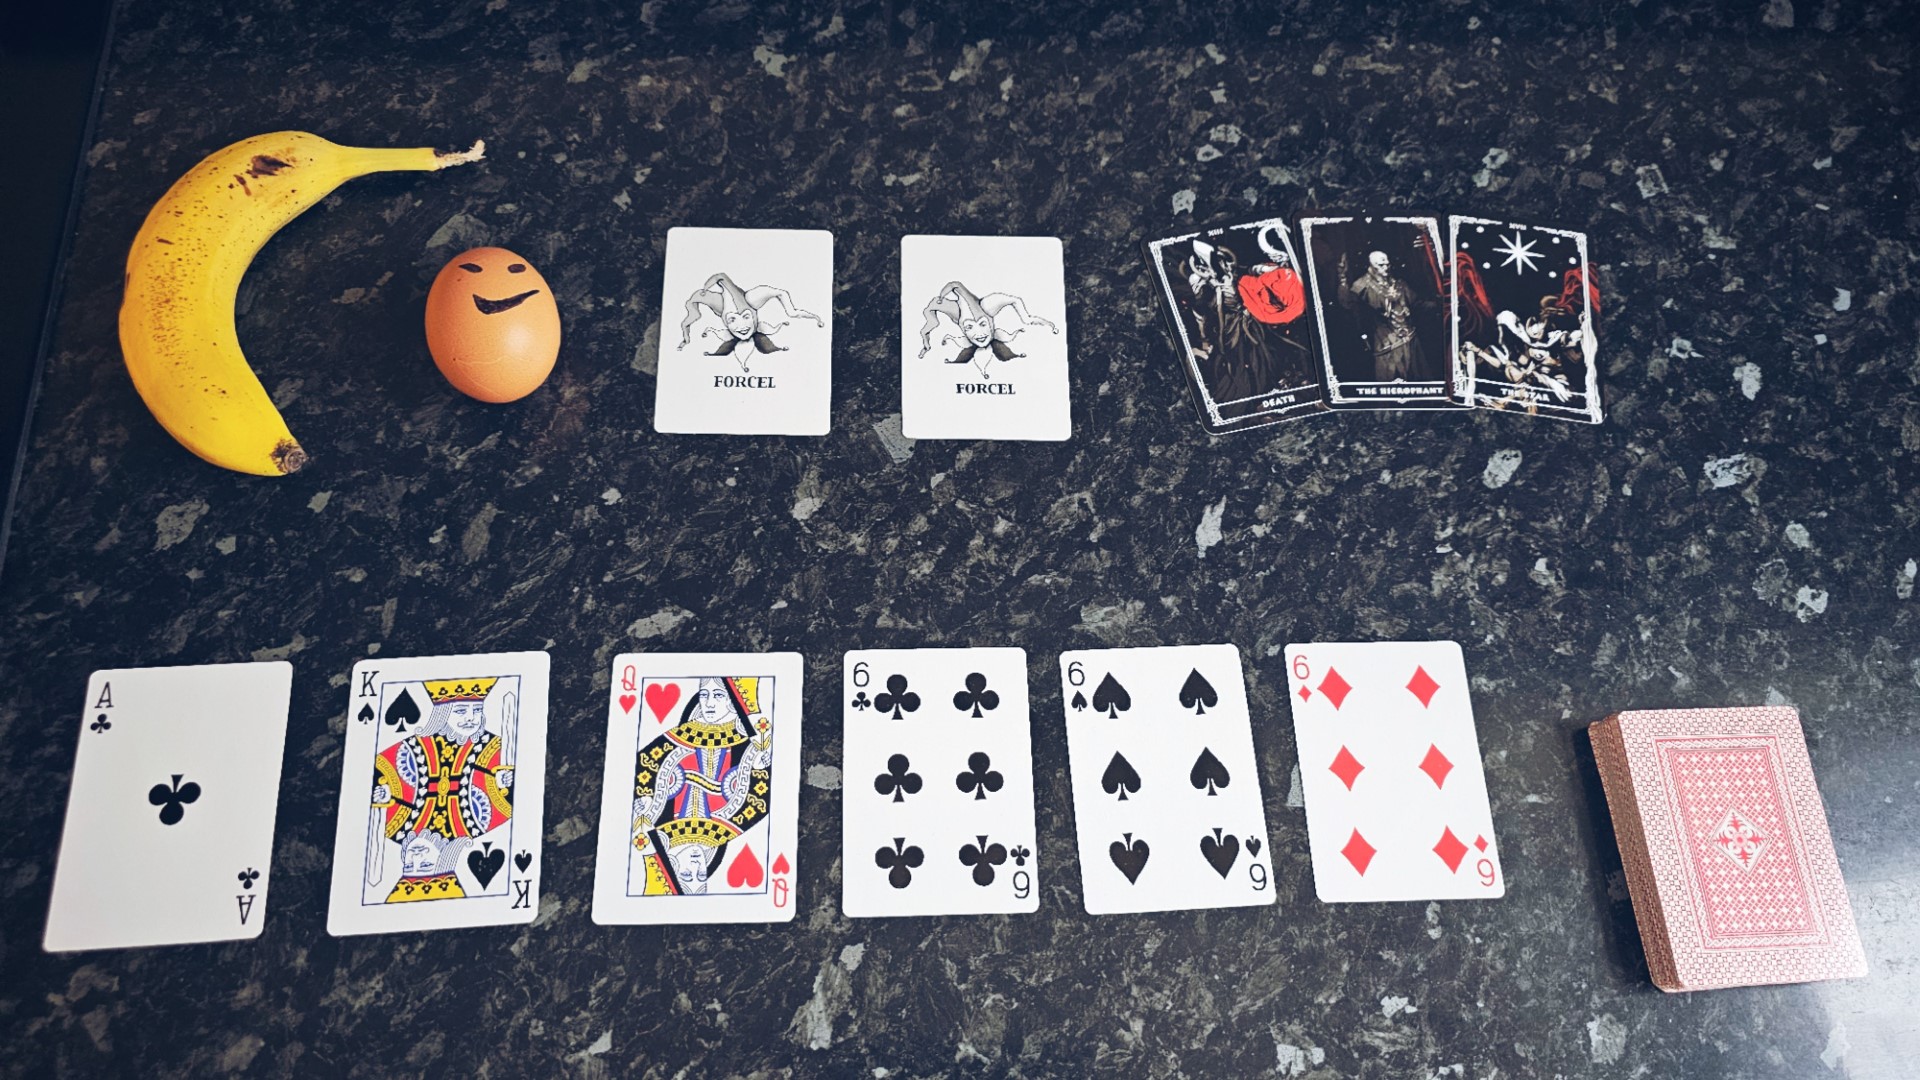 Playing cards, a banana, tarot cards and an egg arranged in the style of Balatro